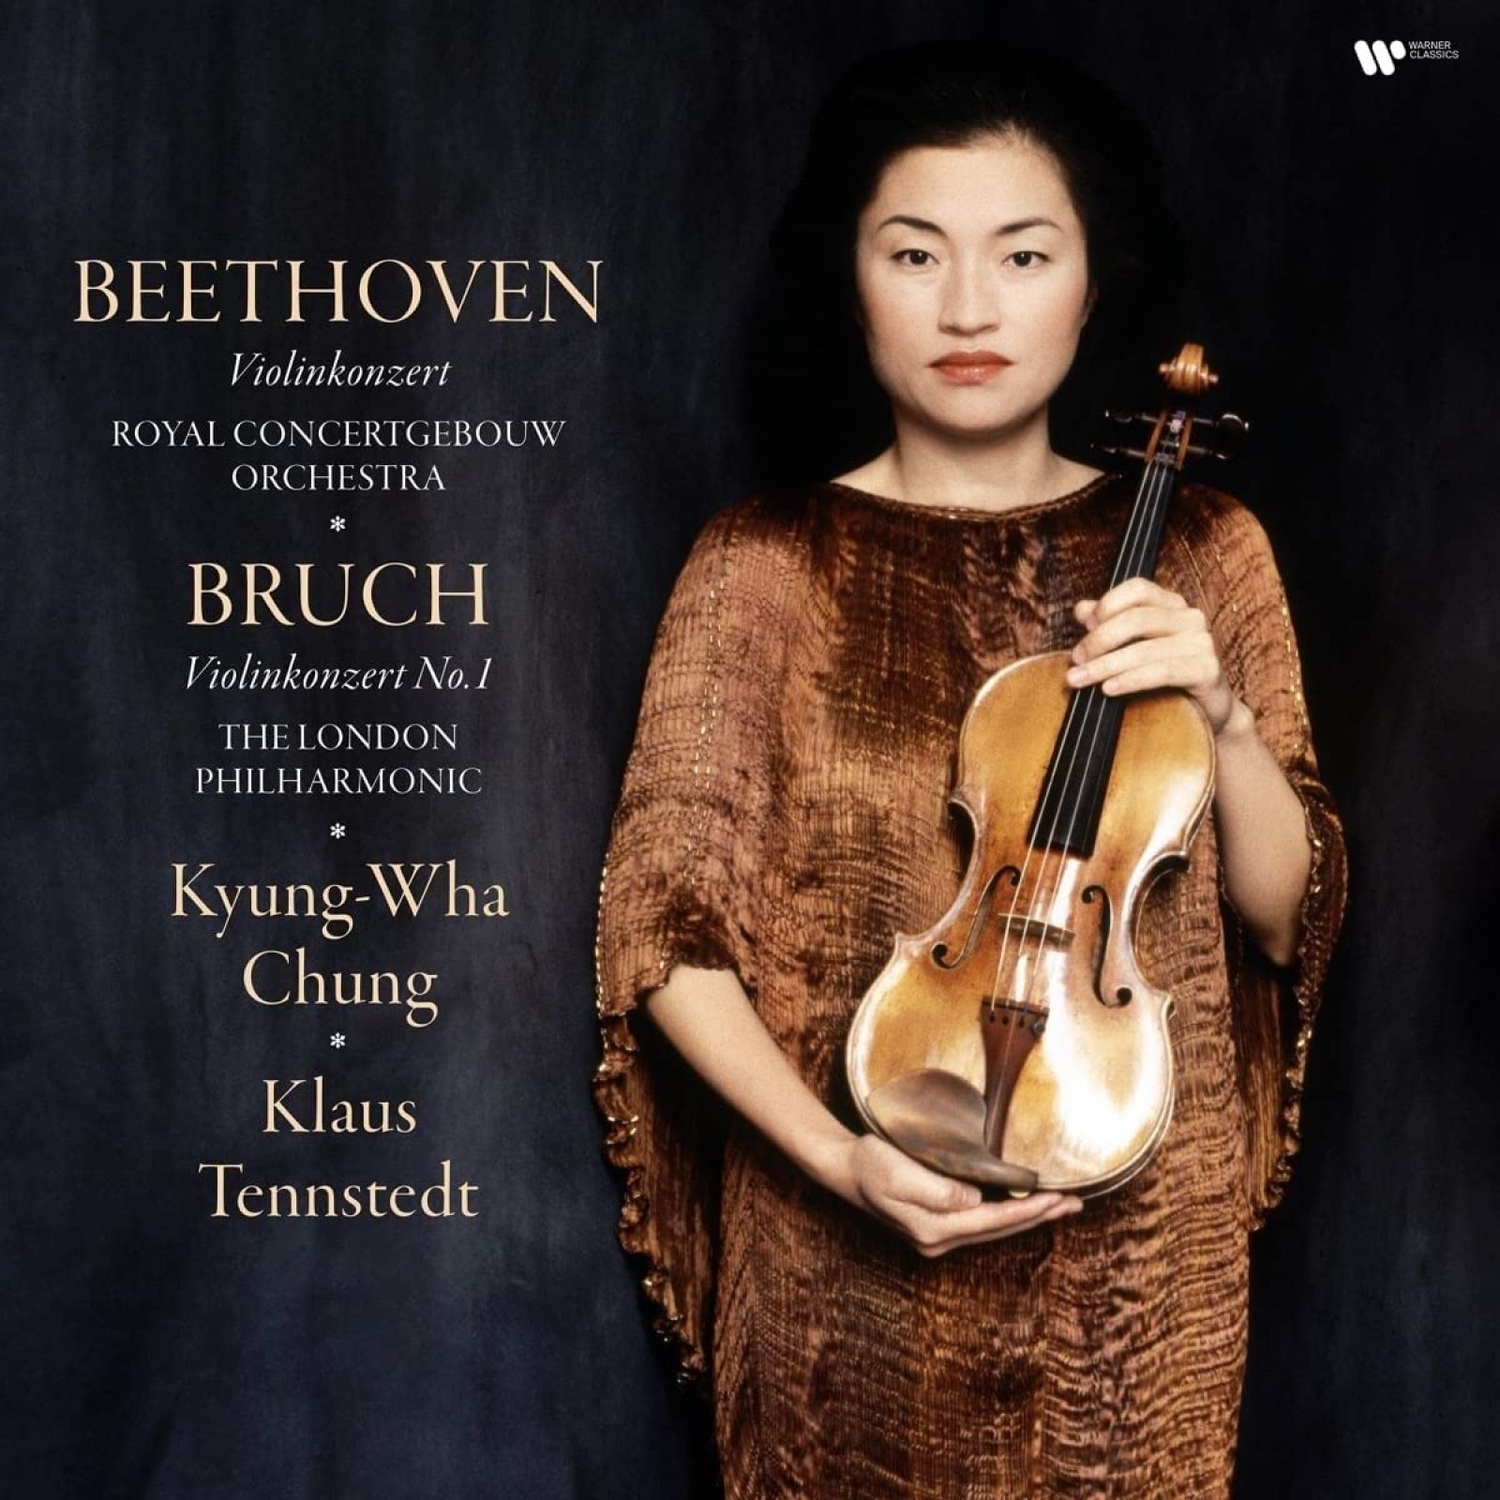 kyung wha chung виниловая пластинка kyung wha chung beethoven violin concerto Виниловая Пластинка Kyung-Wha Chung, Klaus Tennstedt, The London Philharmonic, Concertgebouw Orchestra, Beethoven & Bruch: Violin Concertos (0190296333750)